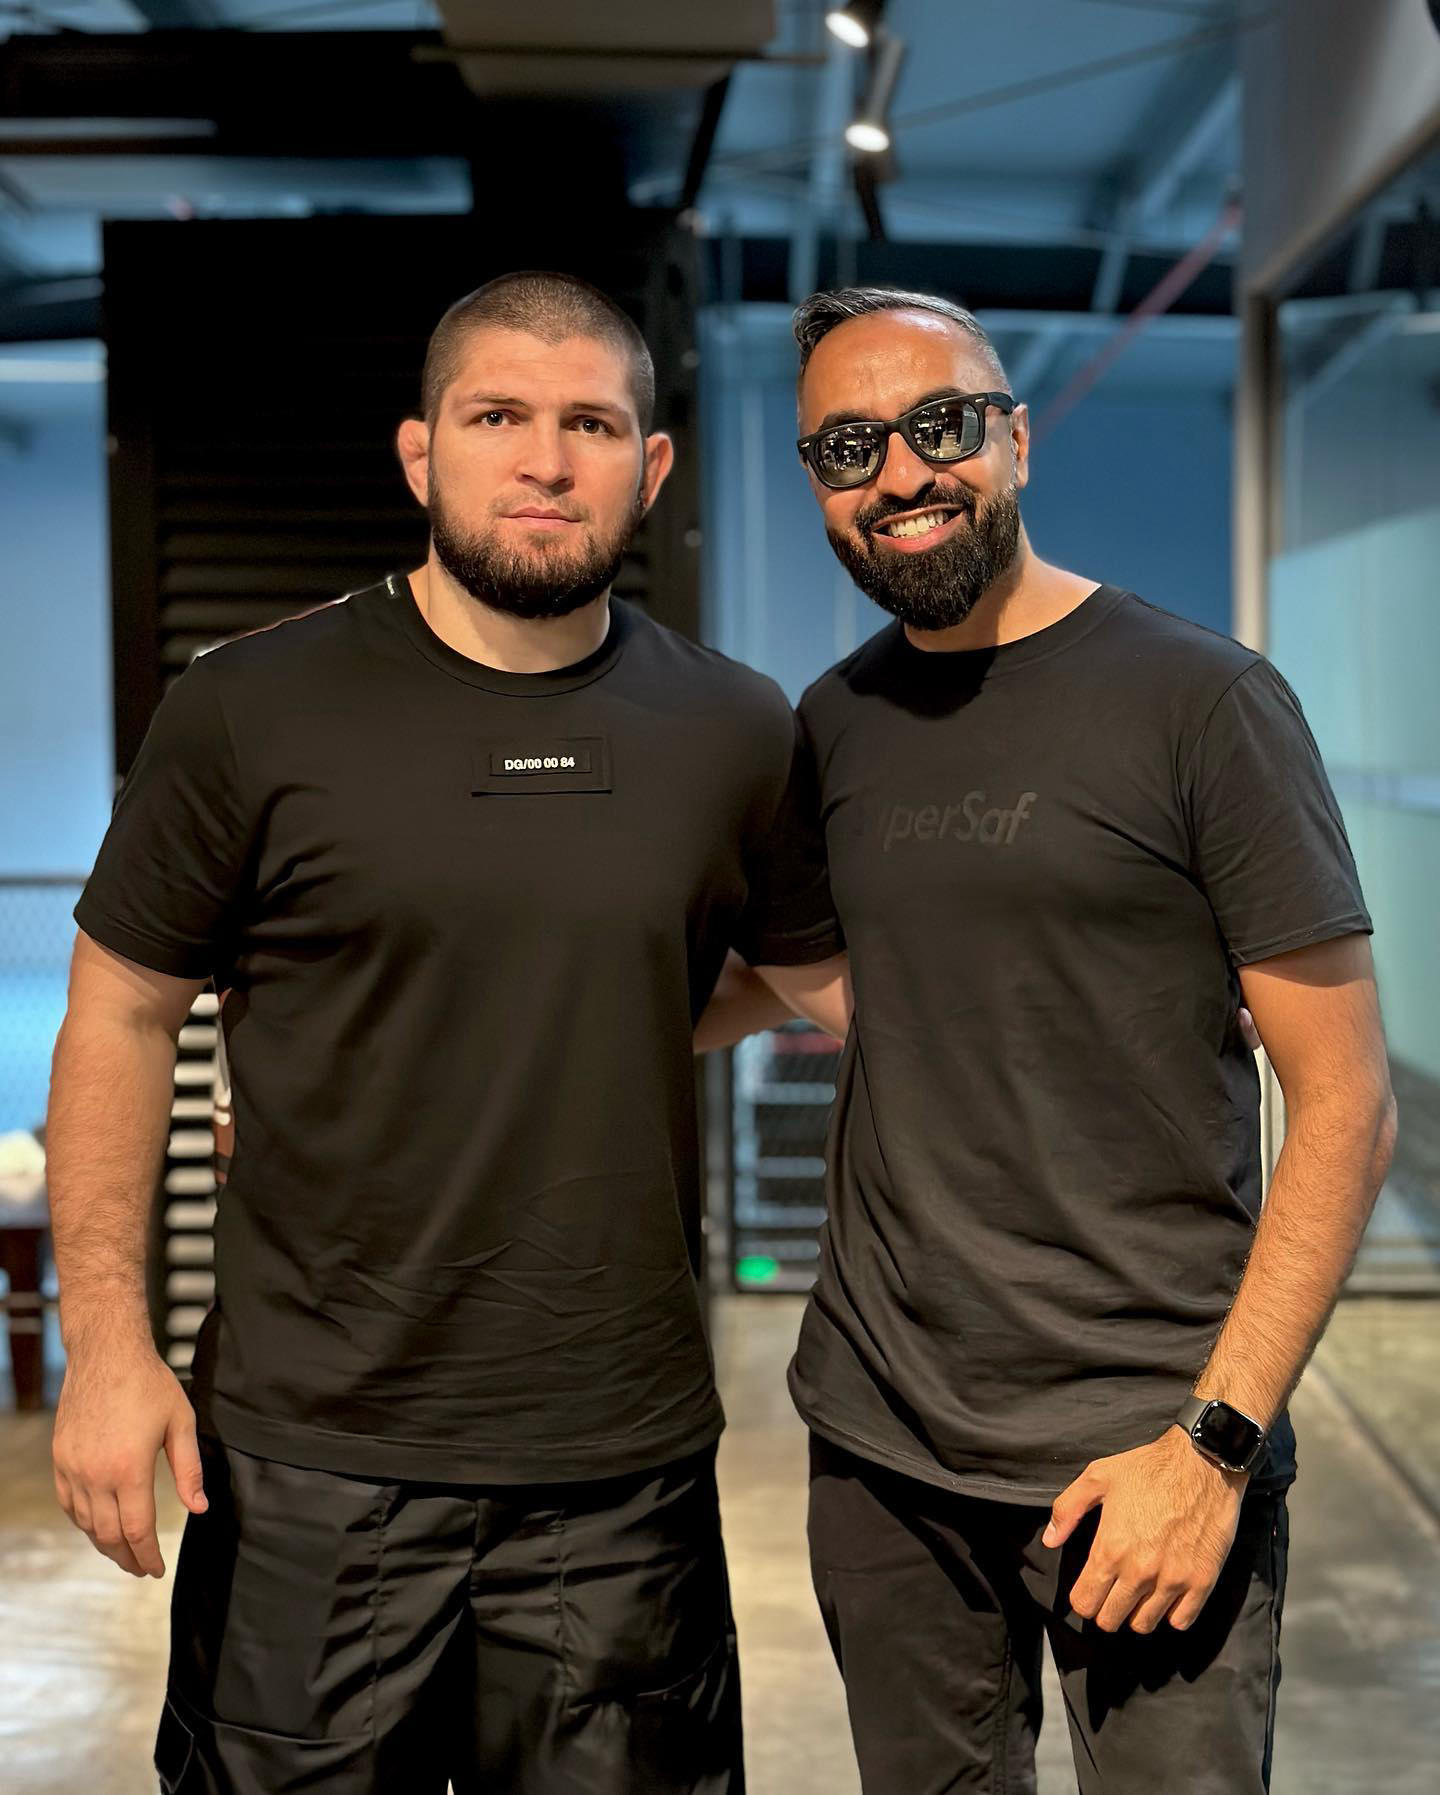 SuperSaf - Just wrapped up on something exciting with #khabib_nurmagomedov and #wahedinvest